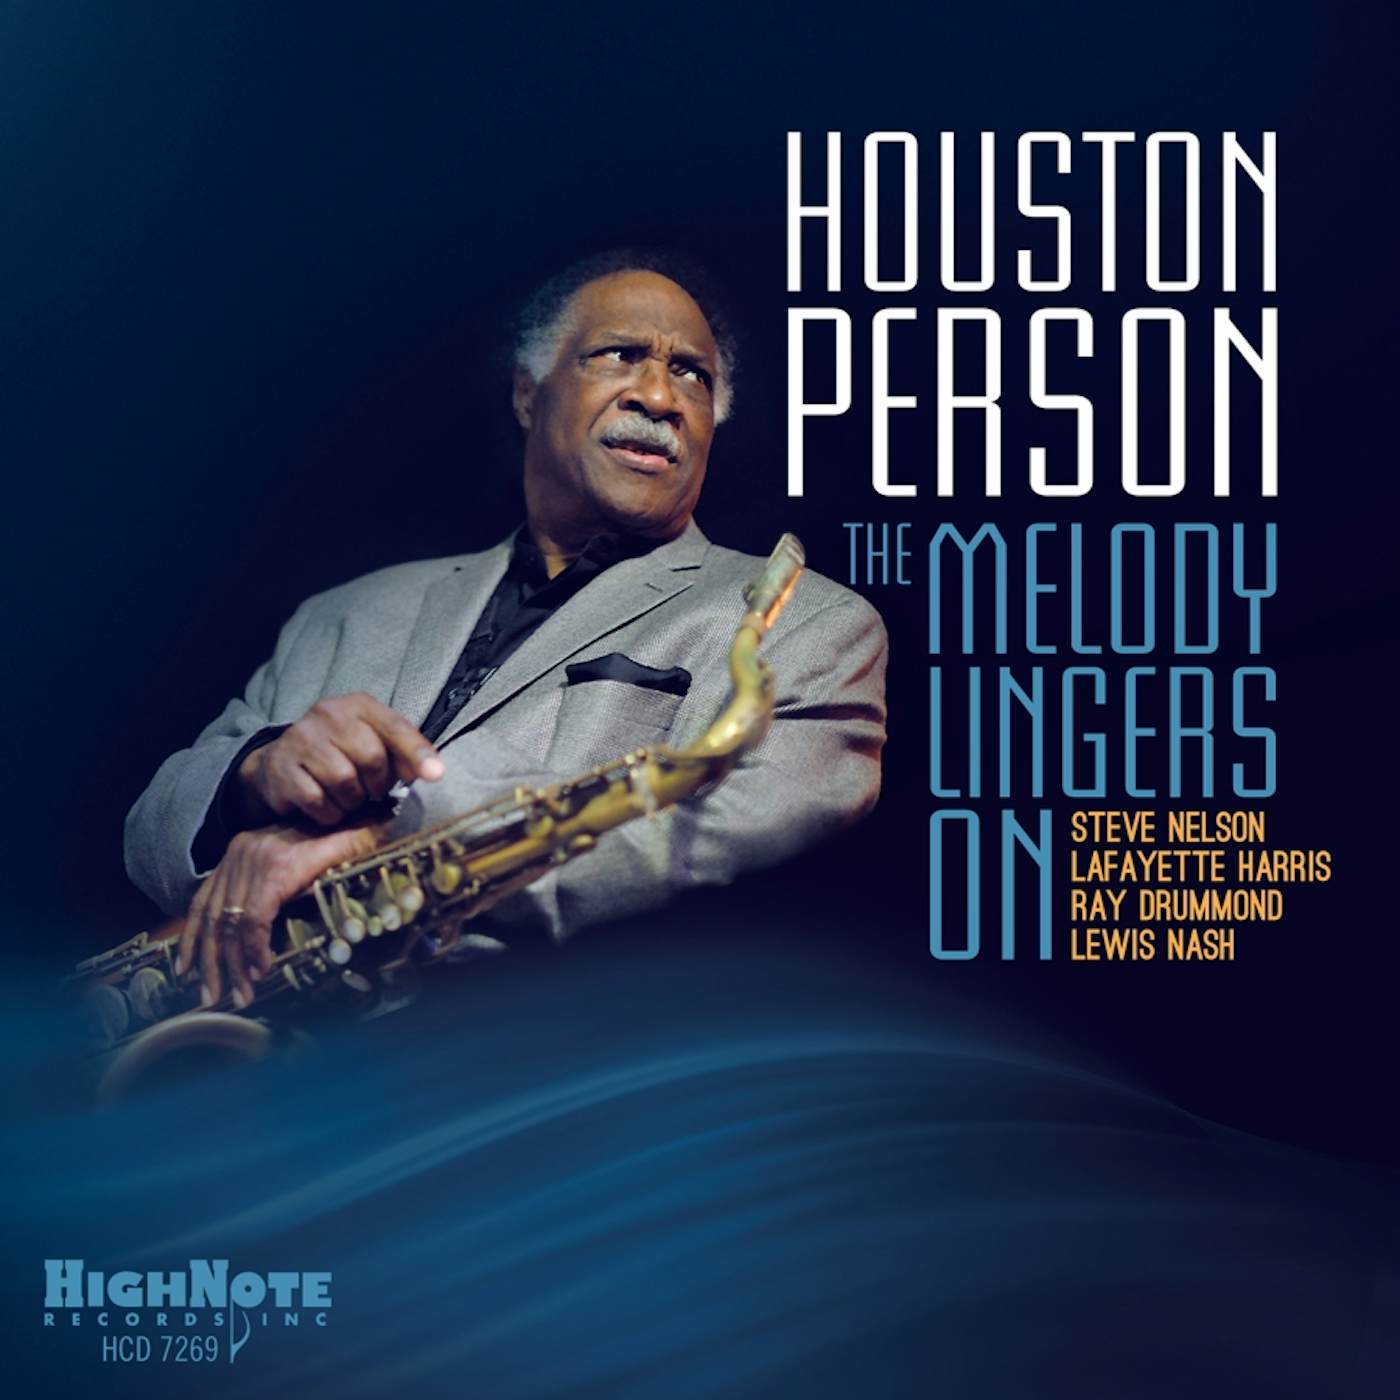 Houston Person MELODY LINGERS ON CD